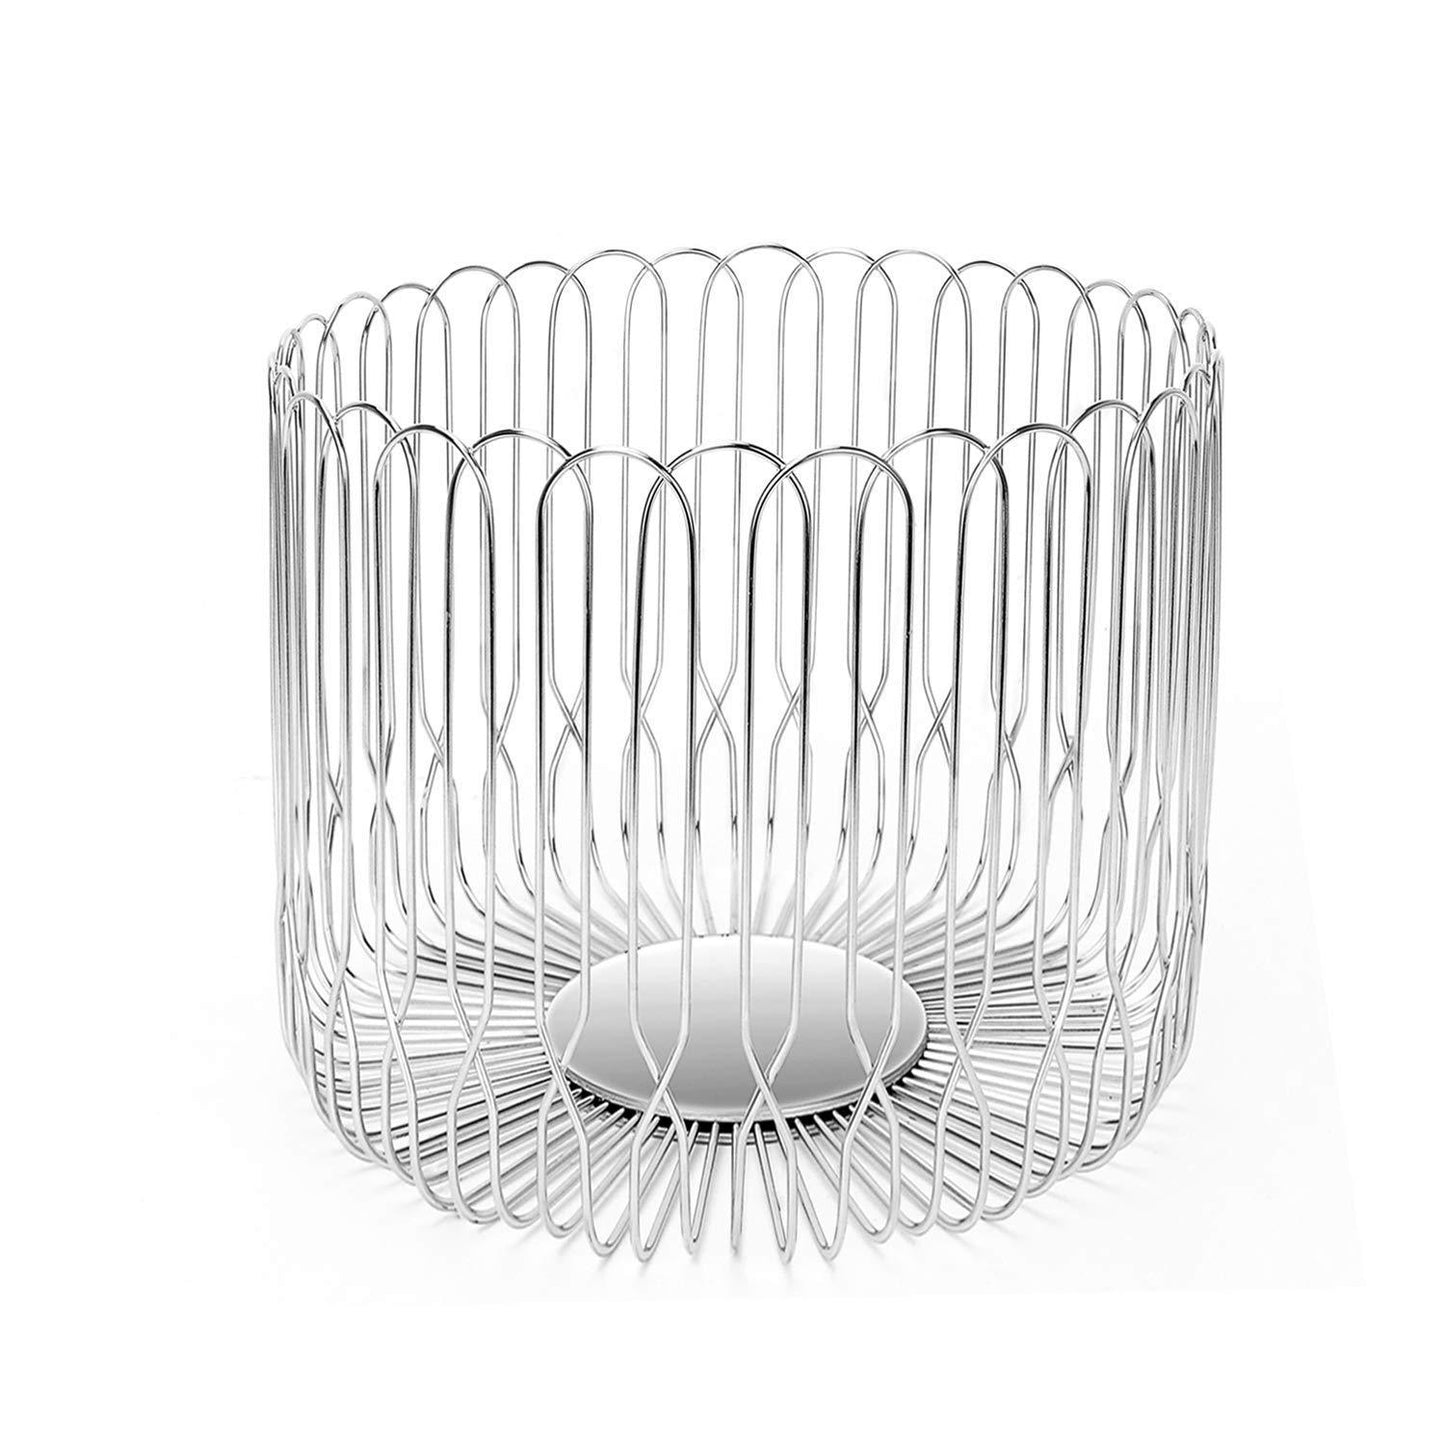 Kitchen fruit basket bowl stainless steel large wire fruit storage basket with bread for kitchen counter lanejoy